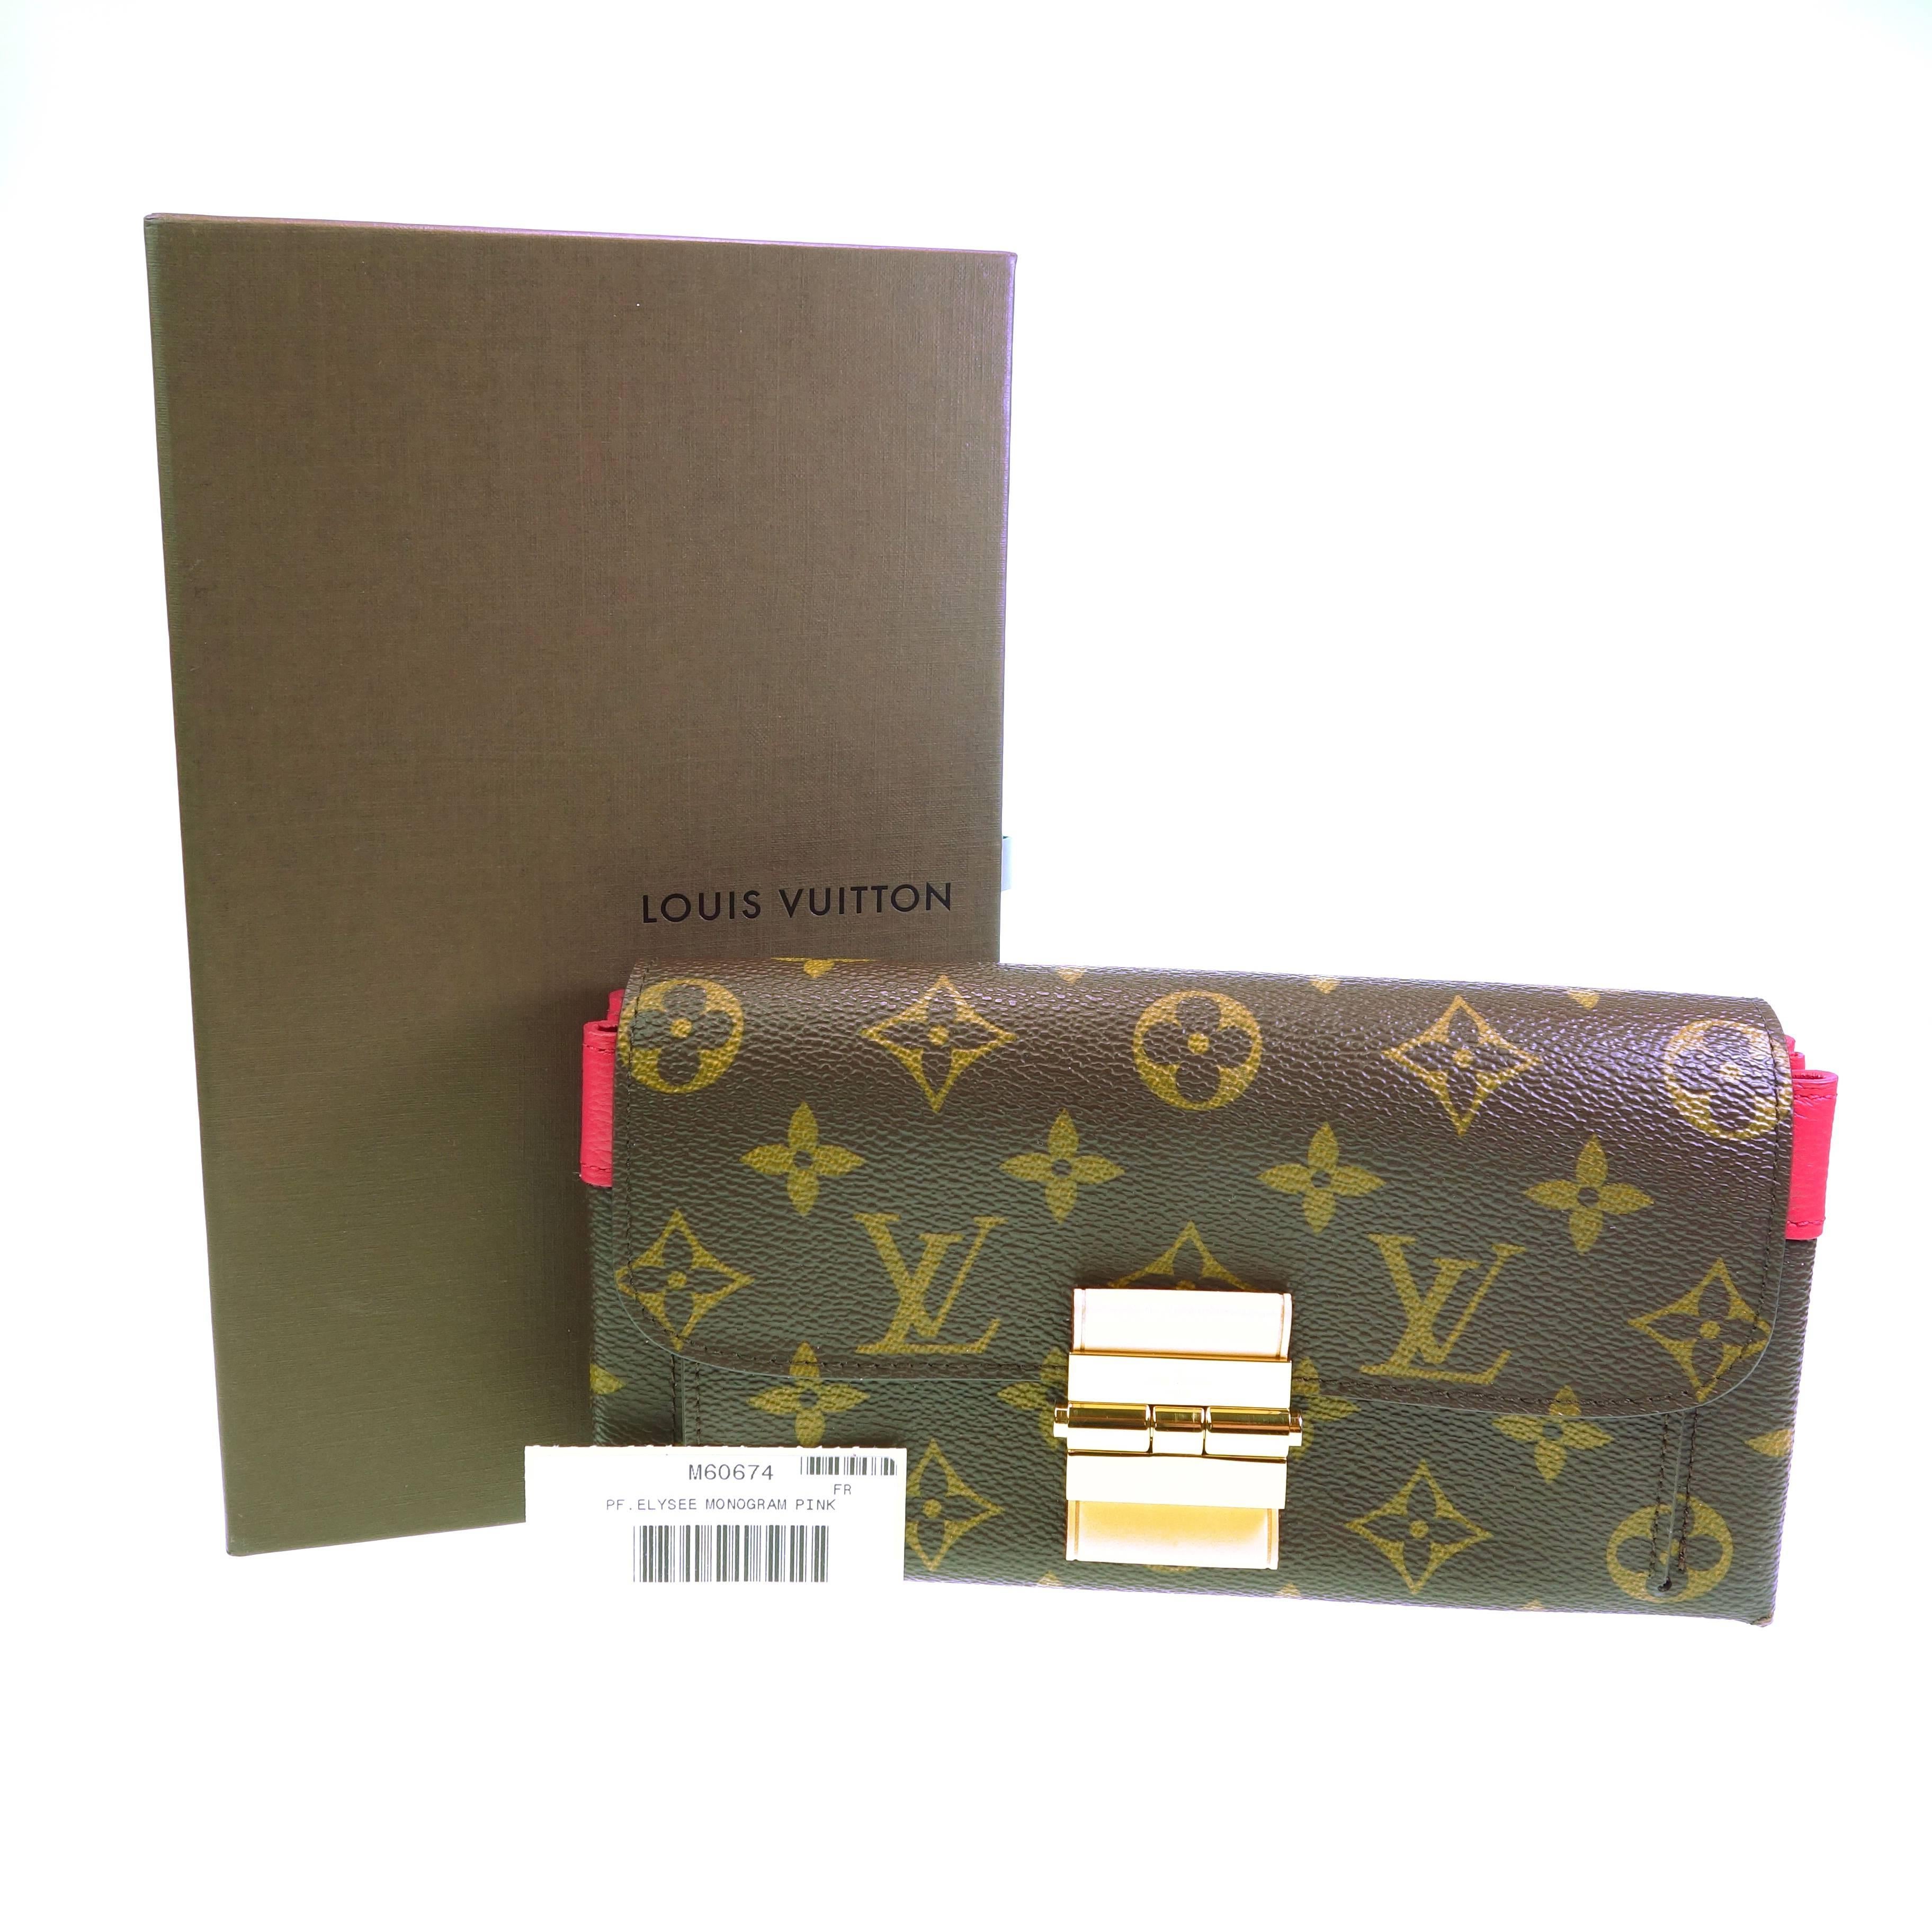 Louis Vuitton Elysee Pink Monogram Wallet Sold Out Color
The Elysée Wallet in iconic Monogram canvas is a stylish blend of vintage-inspired details and exquisite materials. Luxurious calf leather and a classic golden brass S-lock add to its